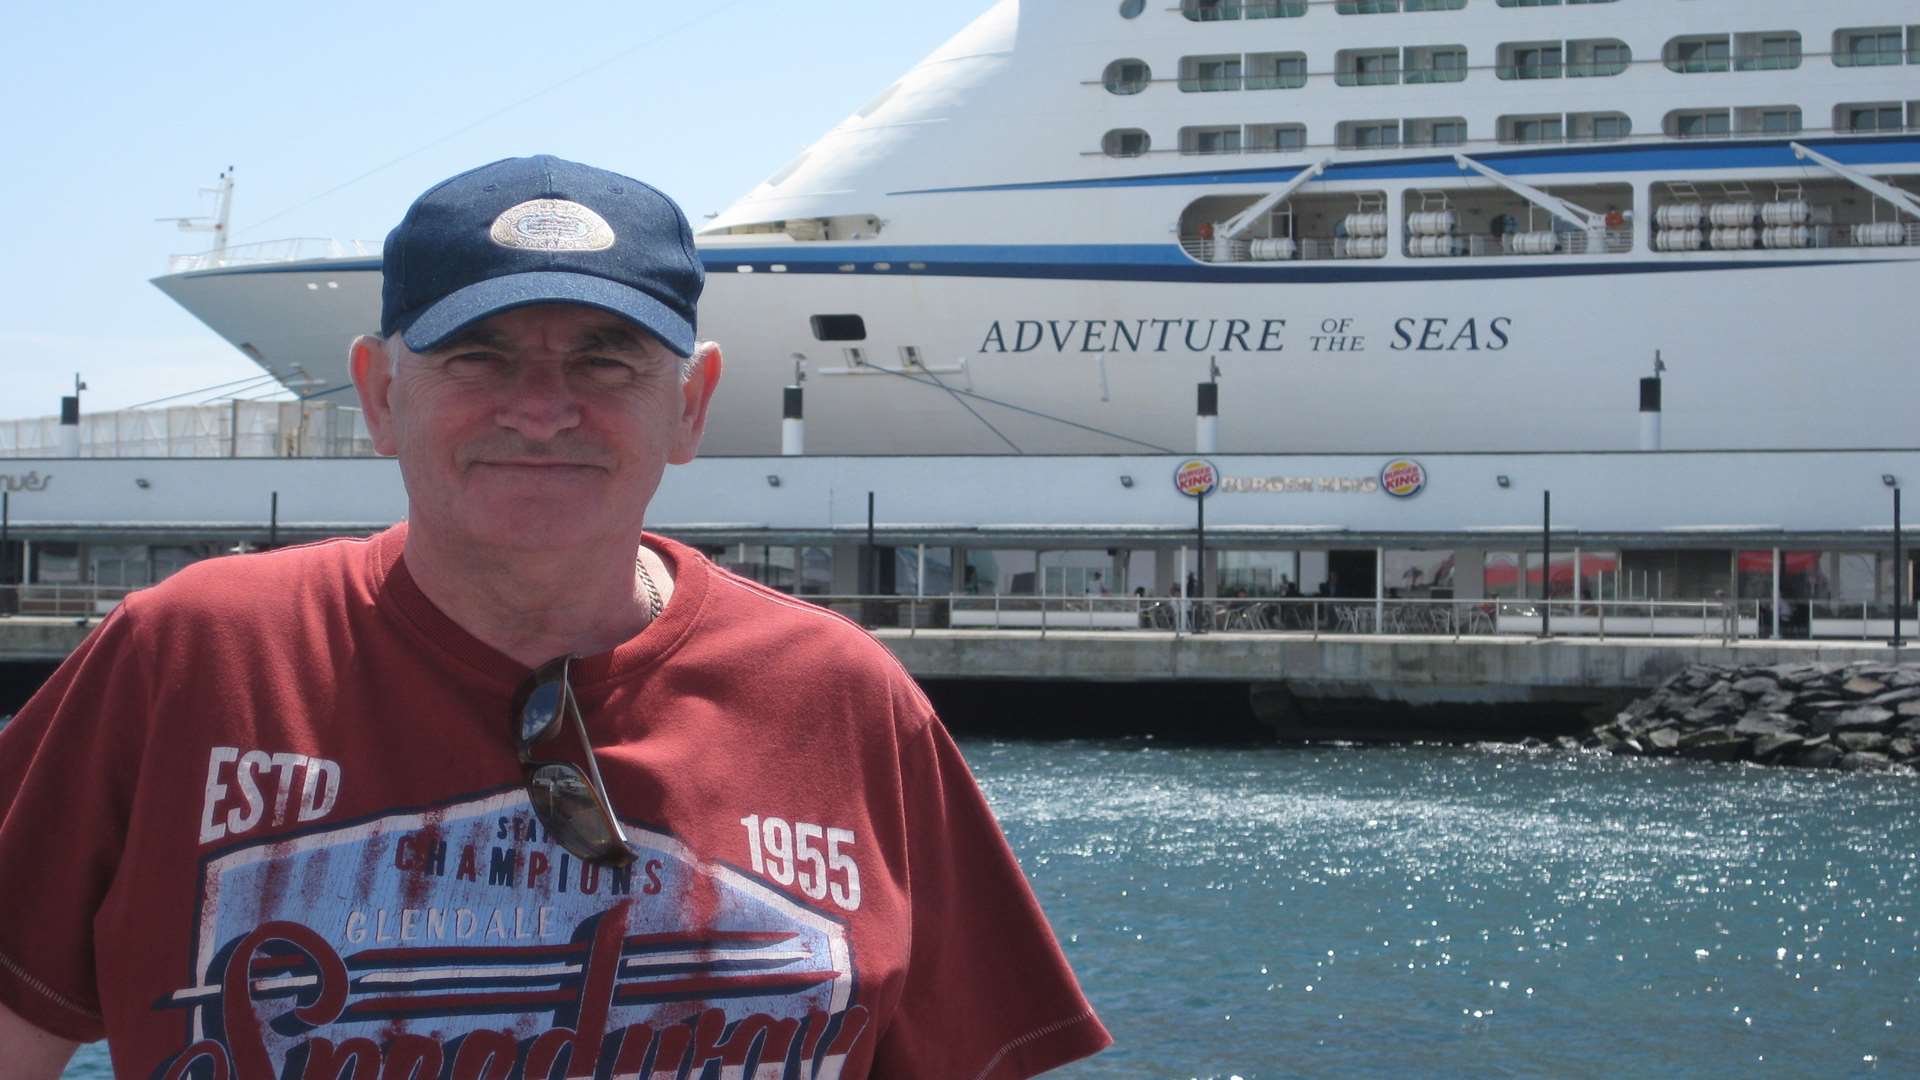 Dave was on a cruise when he fell ill